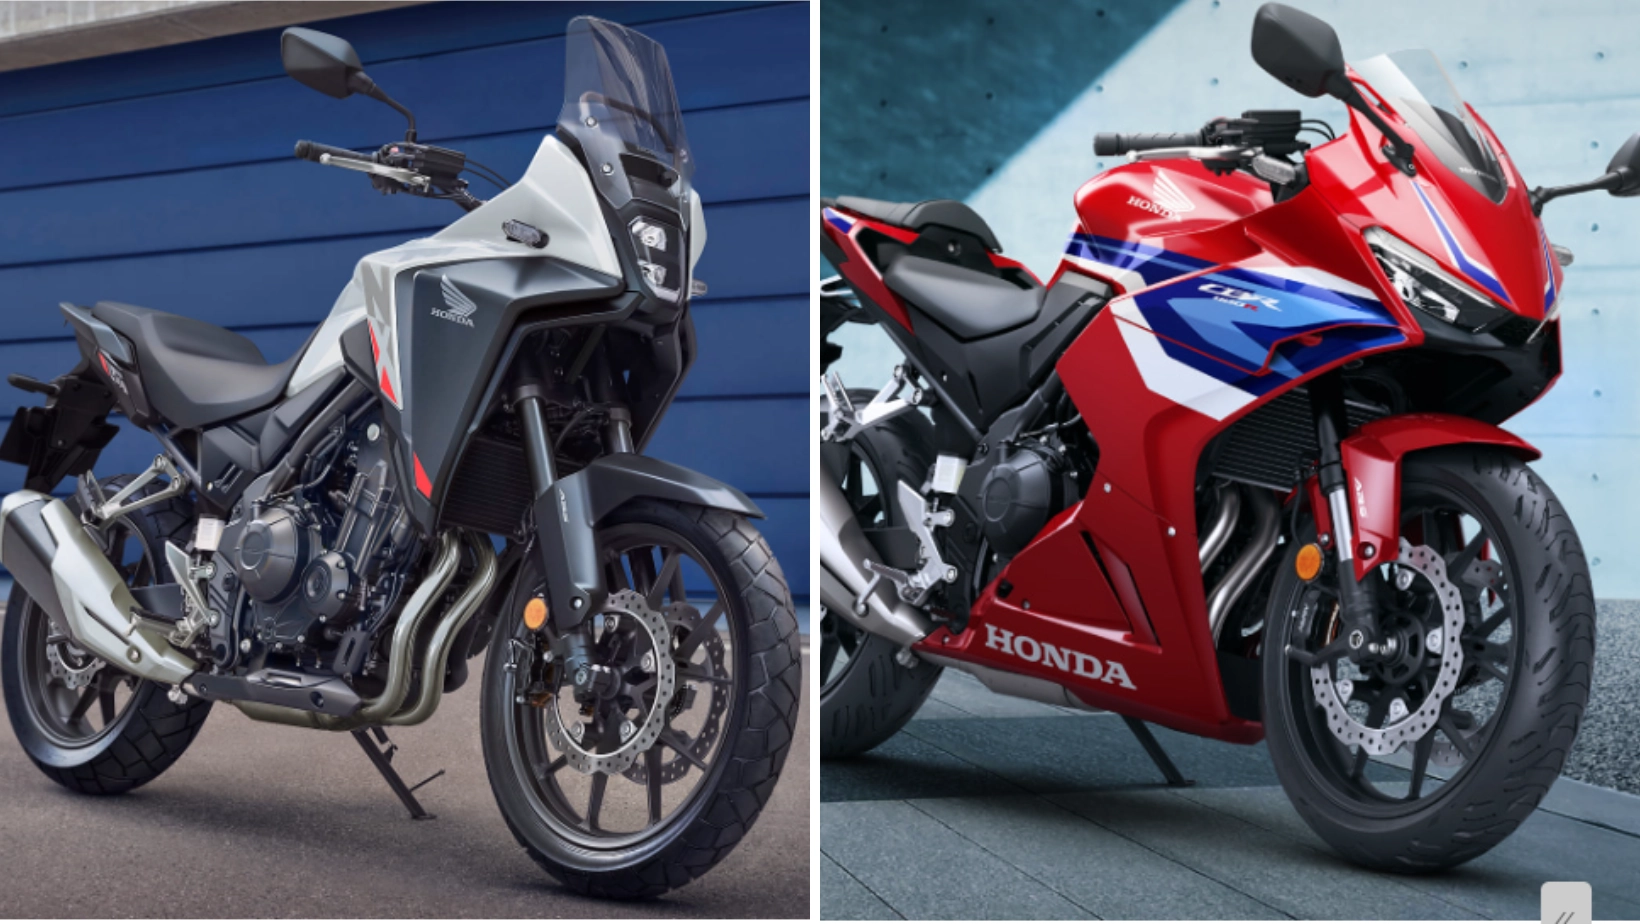 Honda Launches NX400 and CBR400R in Japan  Possible Introduction in India's Market